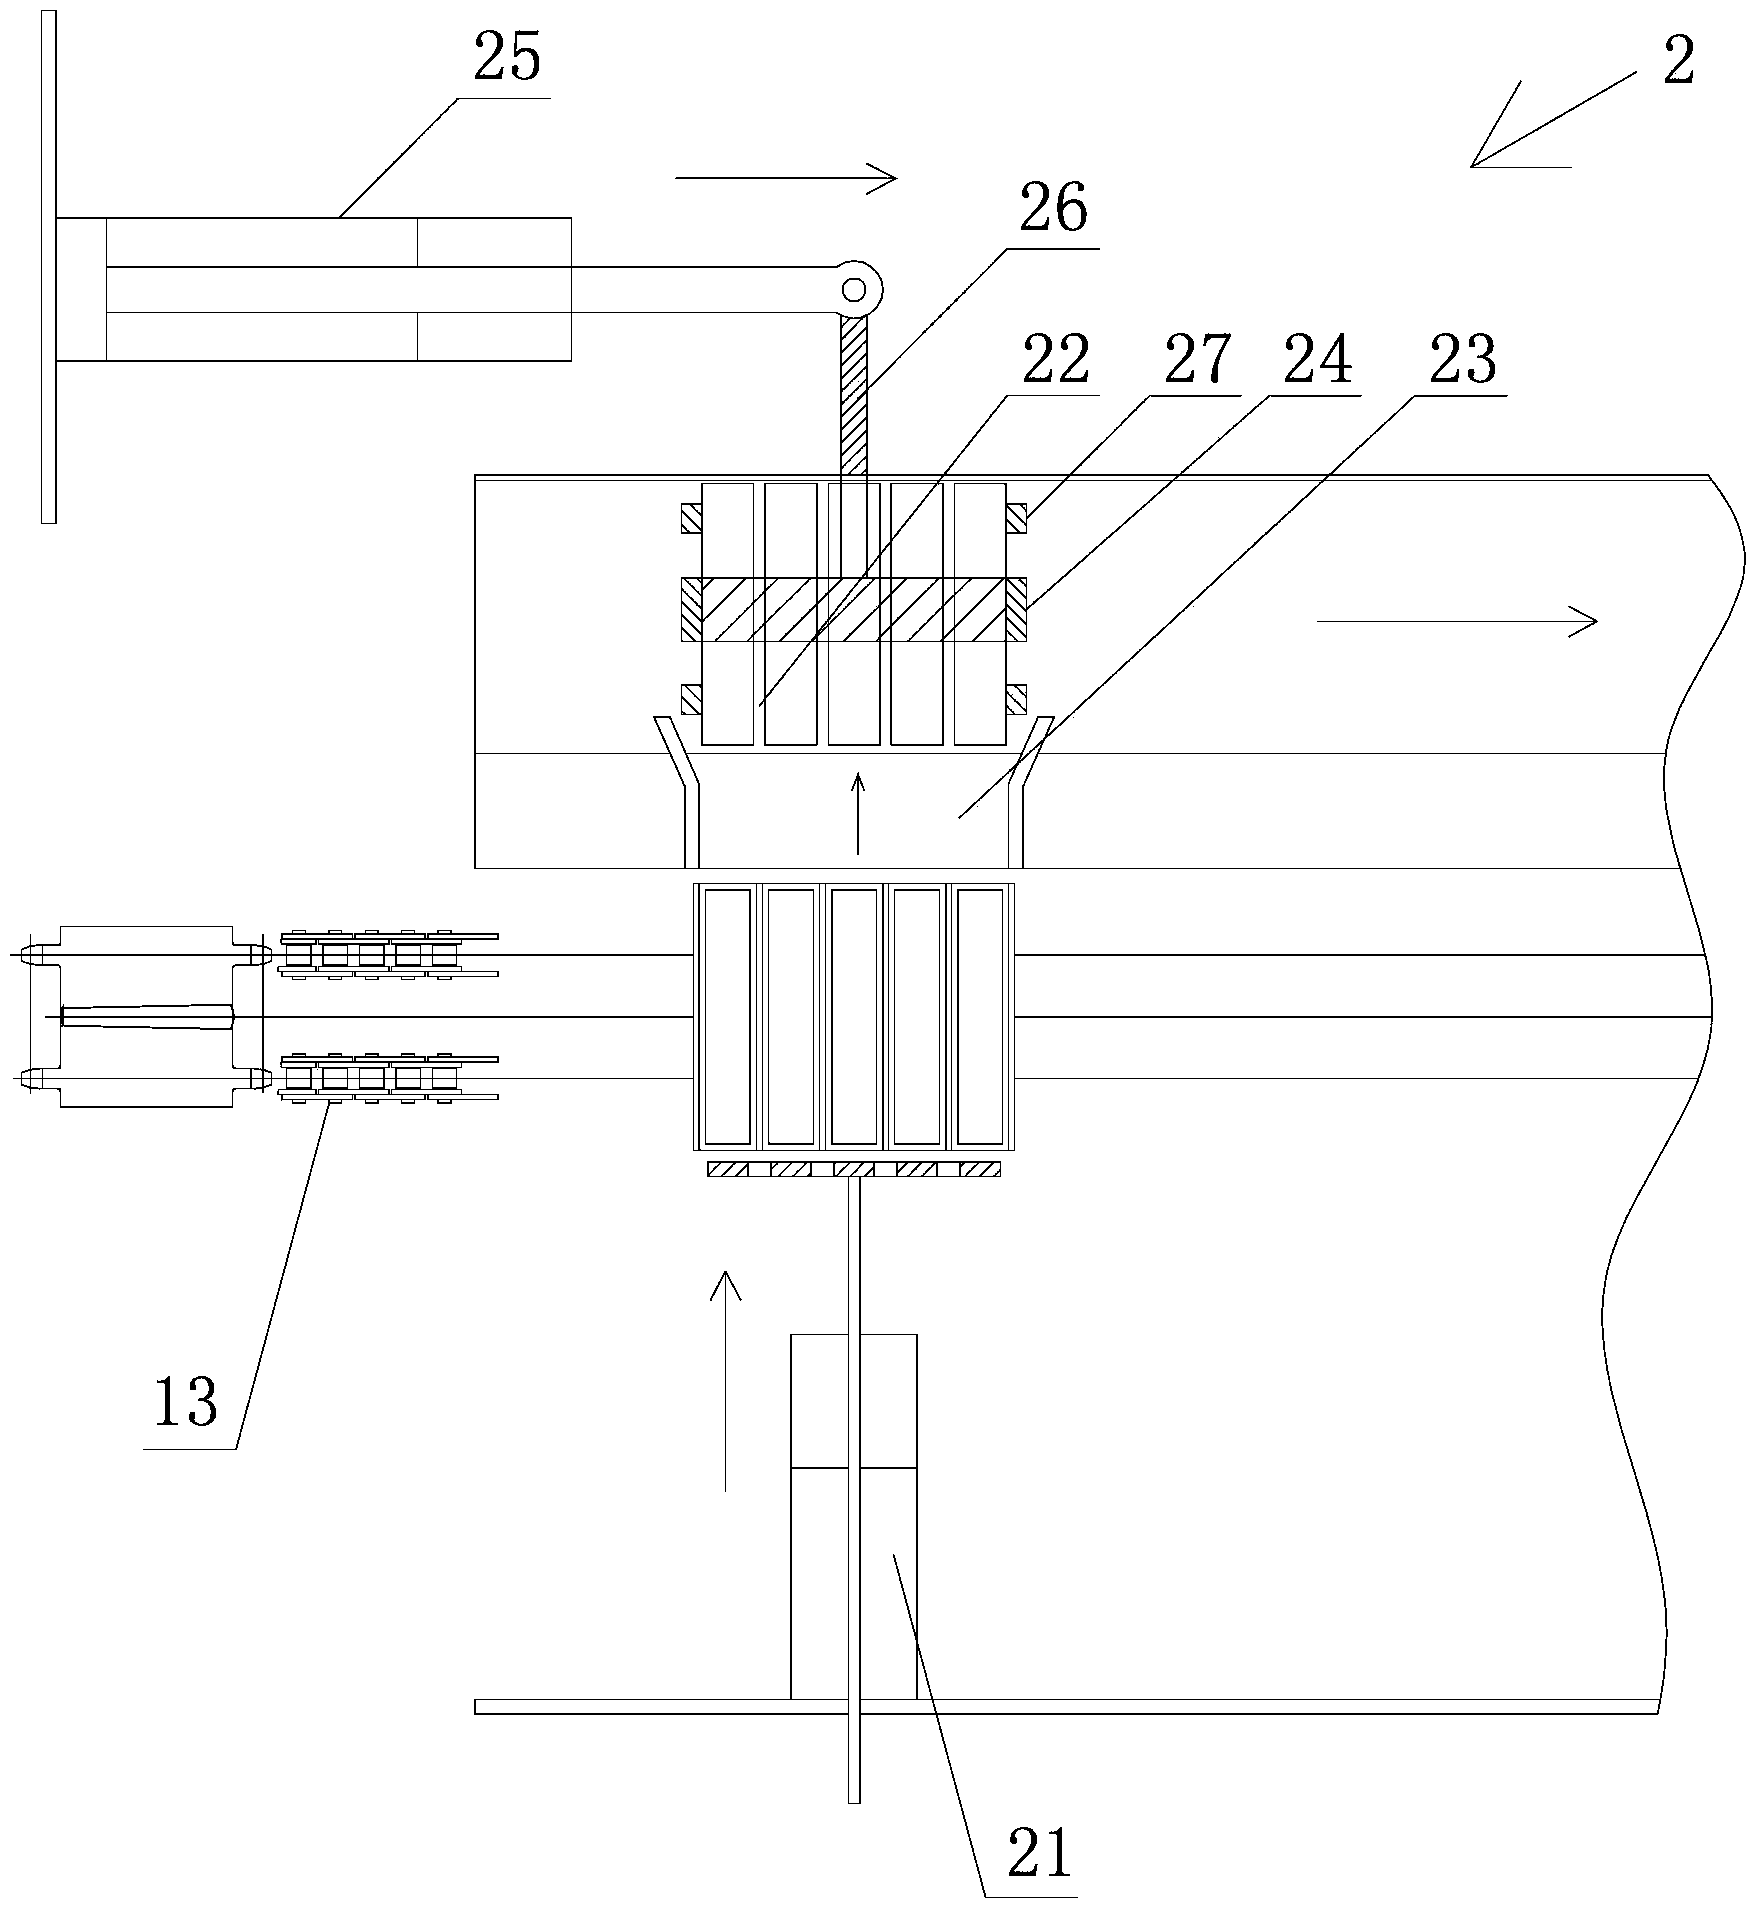 Method and device for automatically arranging, stacking and plastically packaging coin rolls